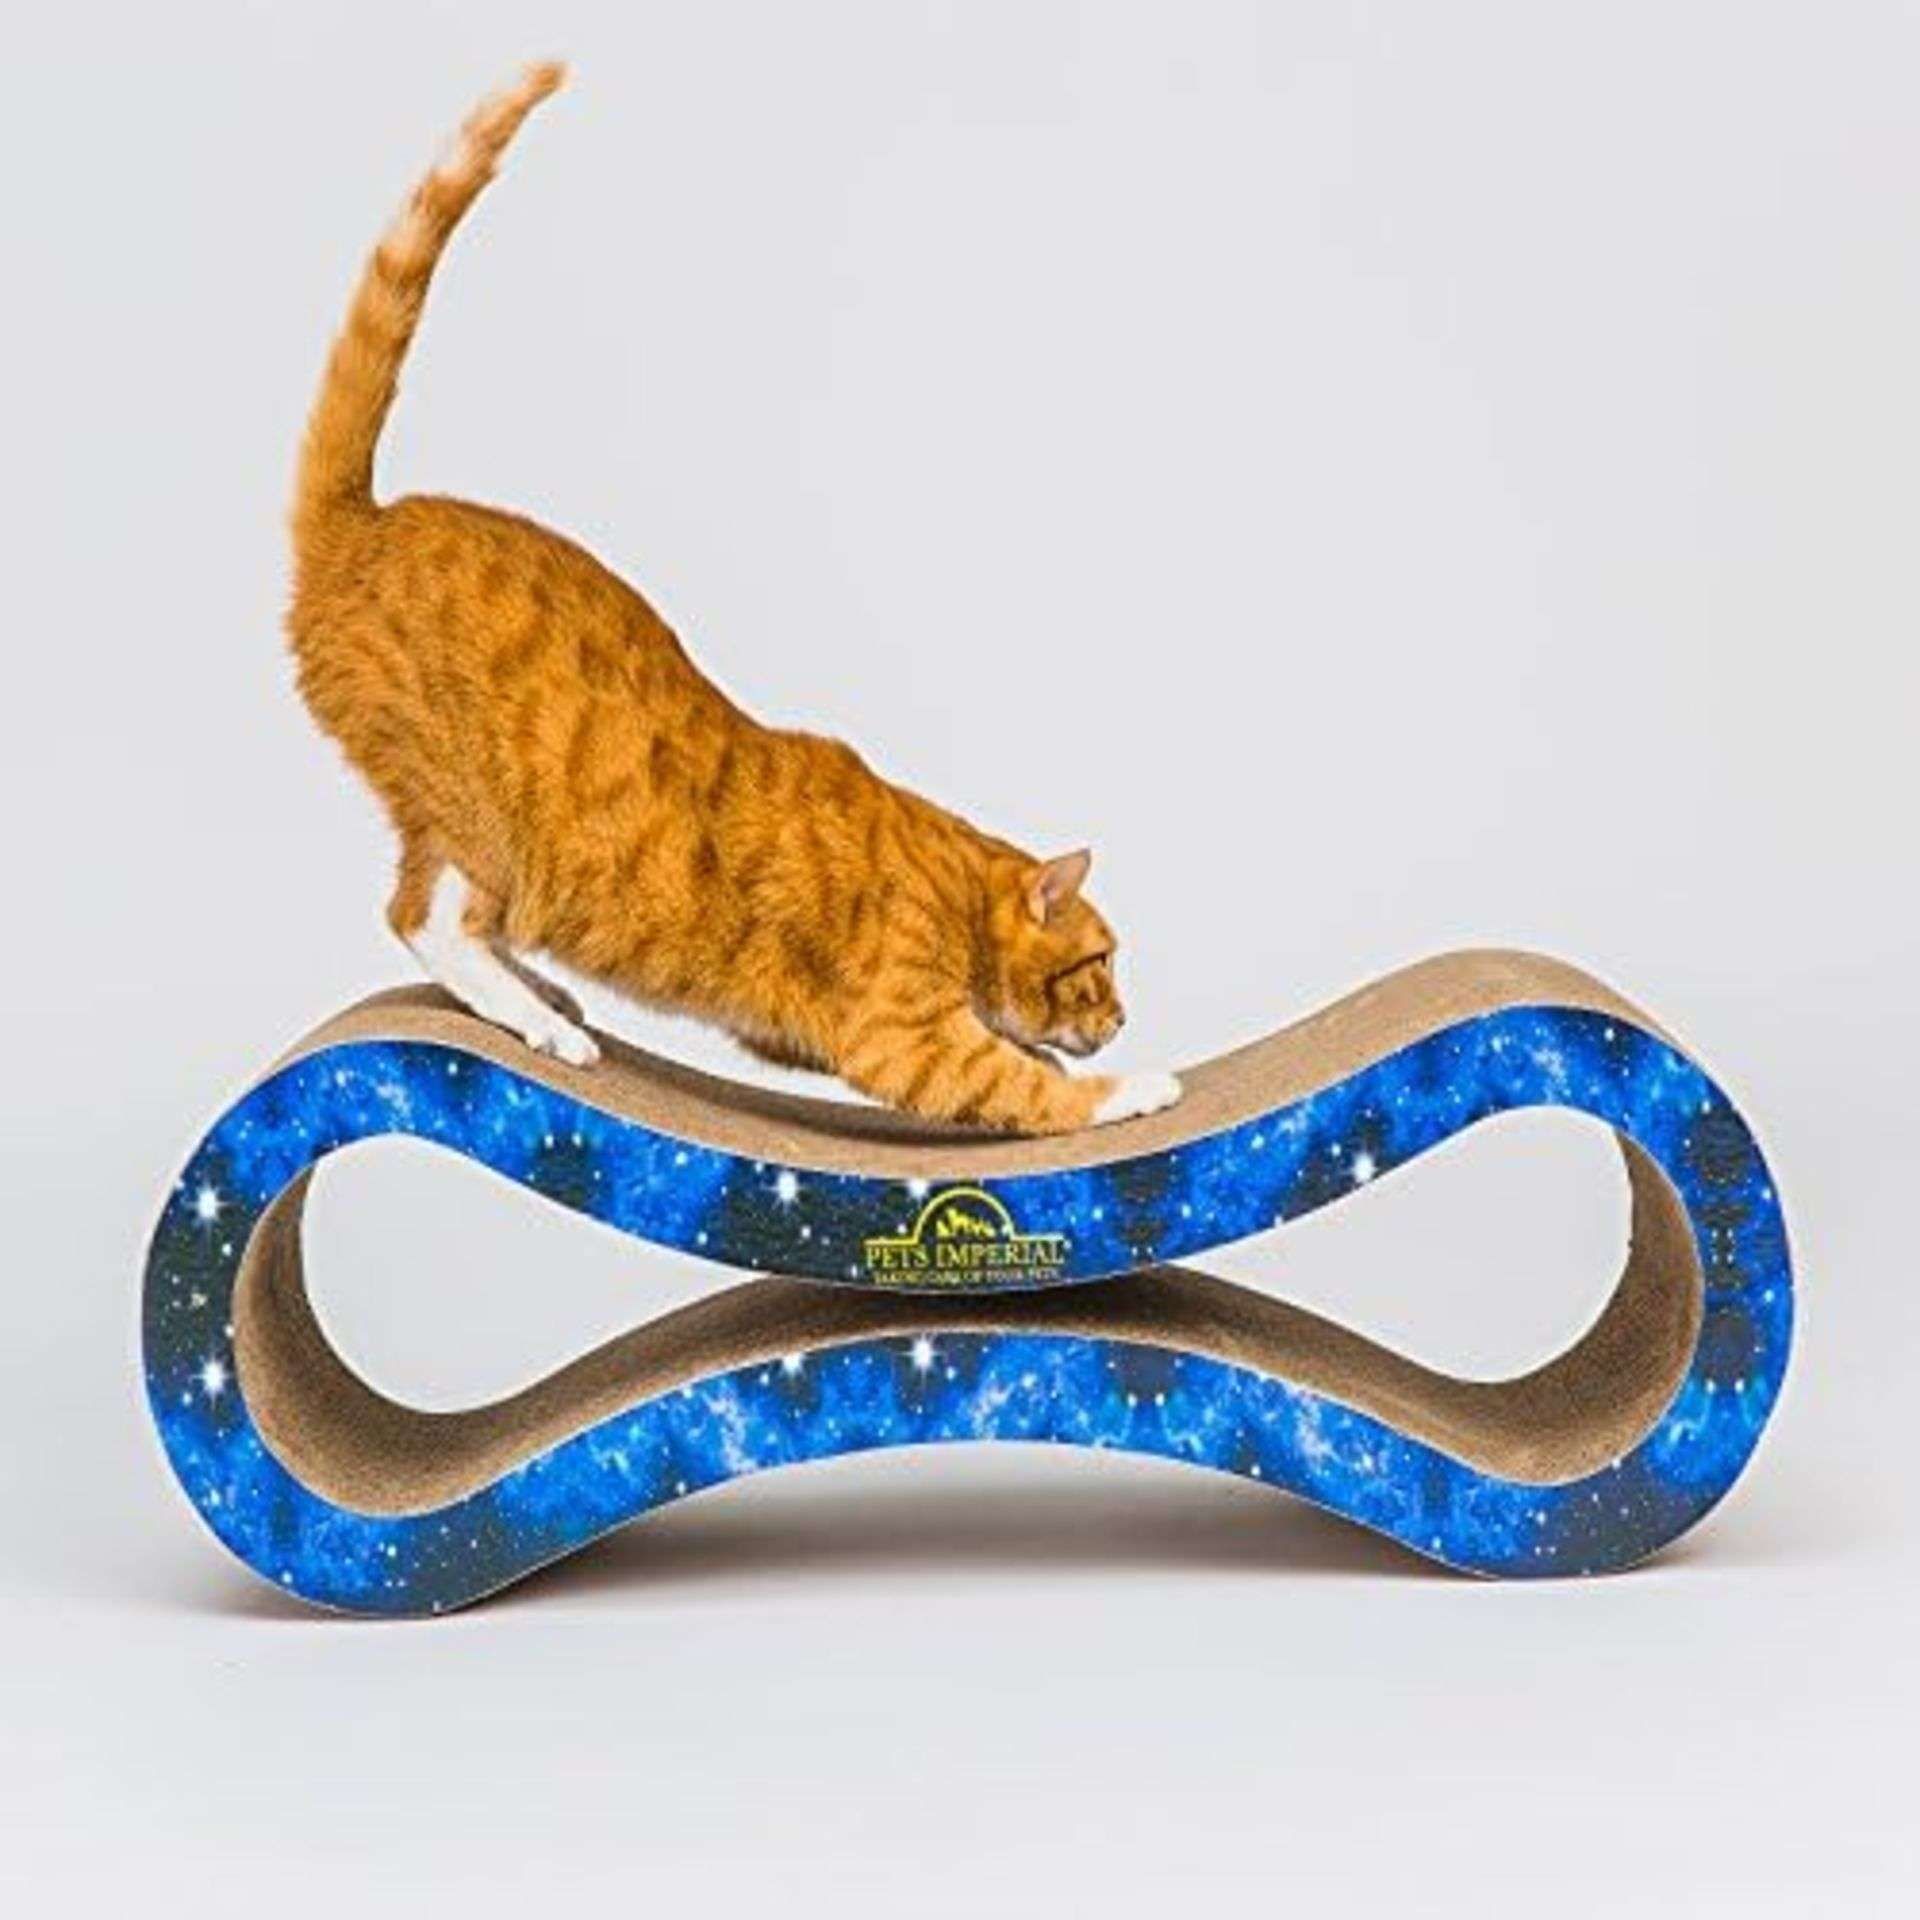 BRAND NEW PETS IMPERIAL KING CAT SCRATCHER LOUNGE WITH BLUE STARRY COLOR PAPER. (S1RA)